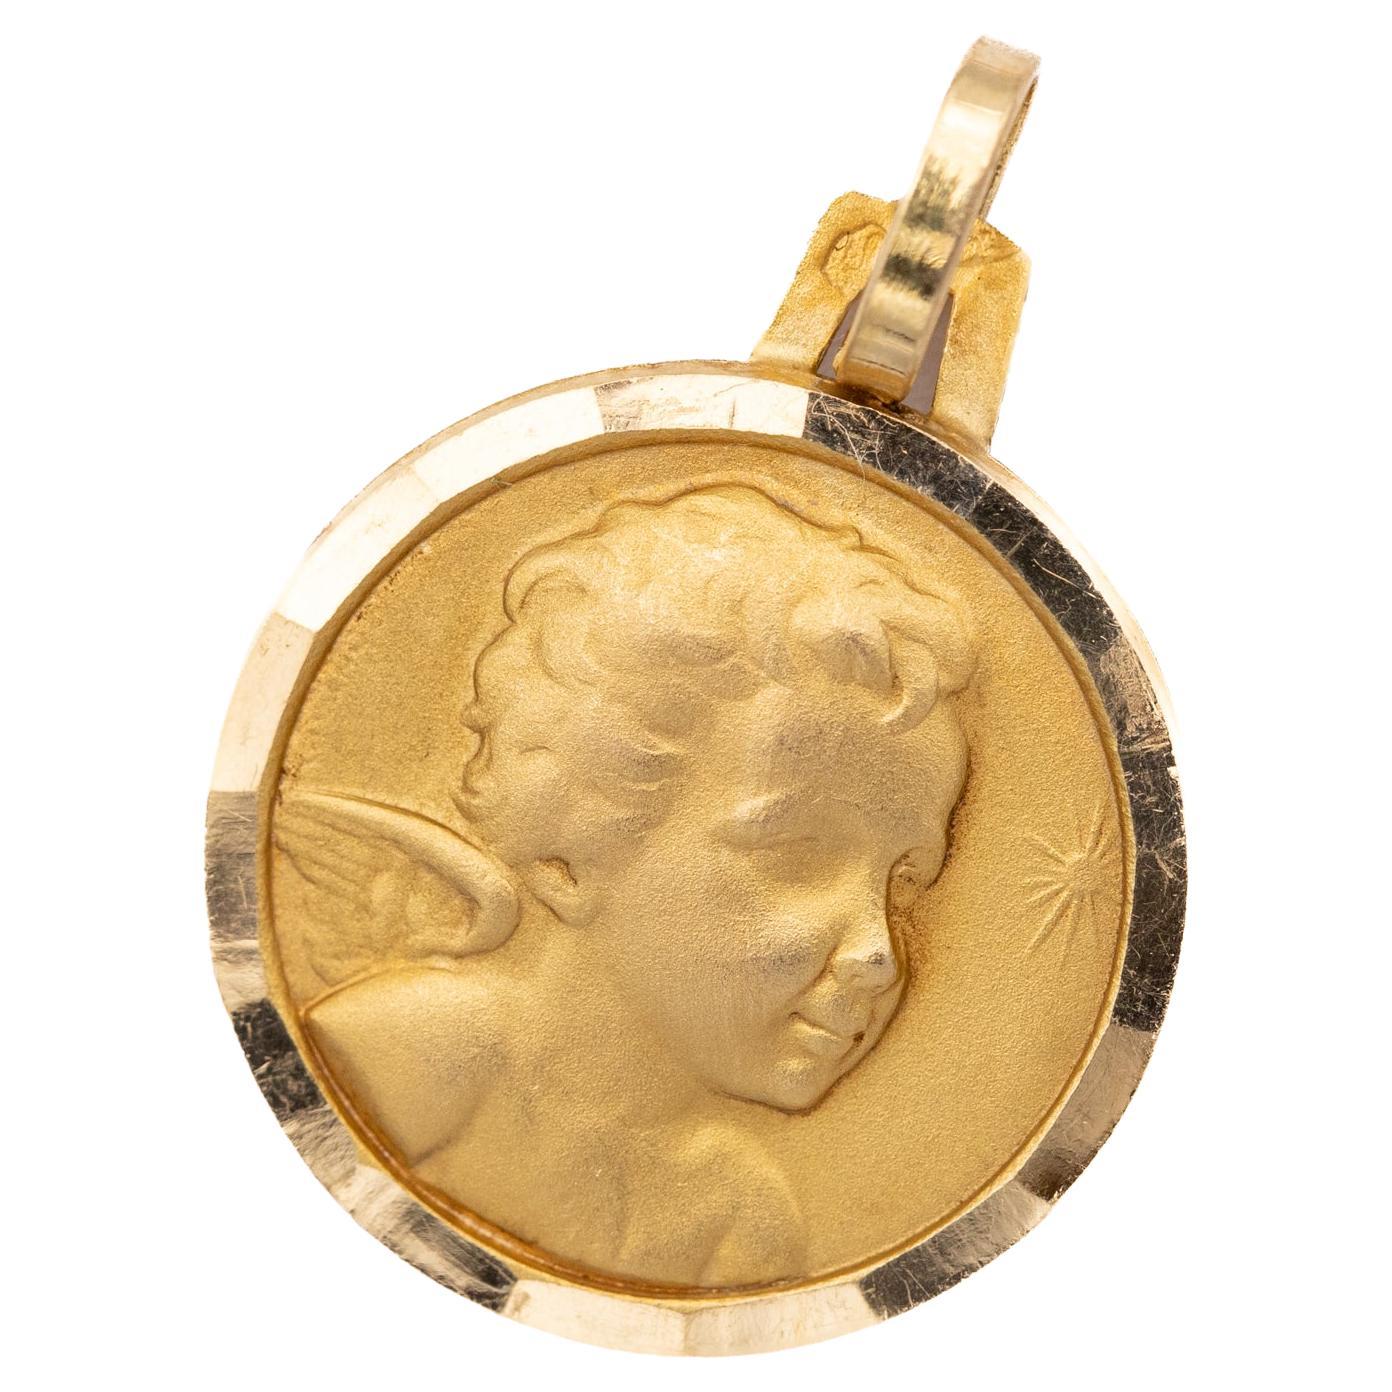  18k French Vintage cherub charm pendant - Angel medallion - solid yellow gold For Sale